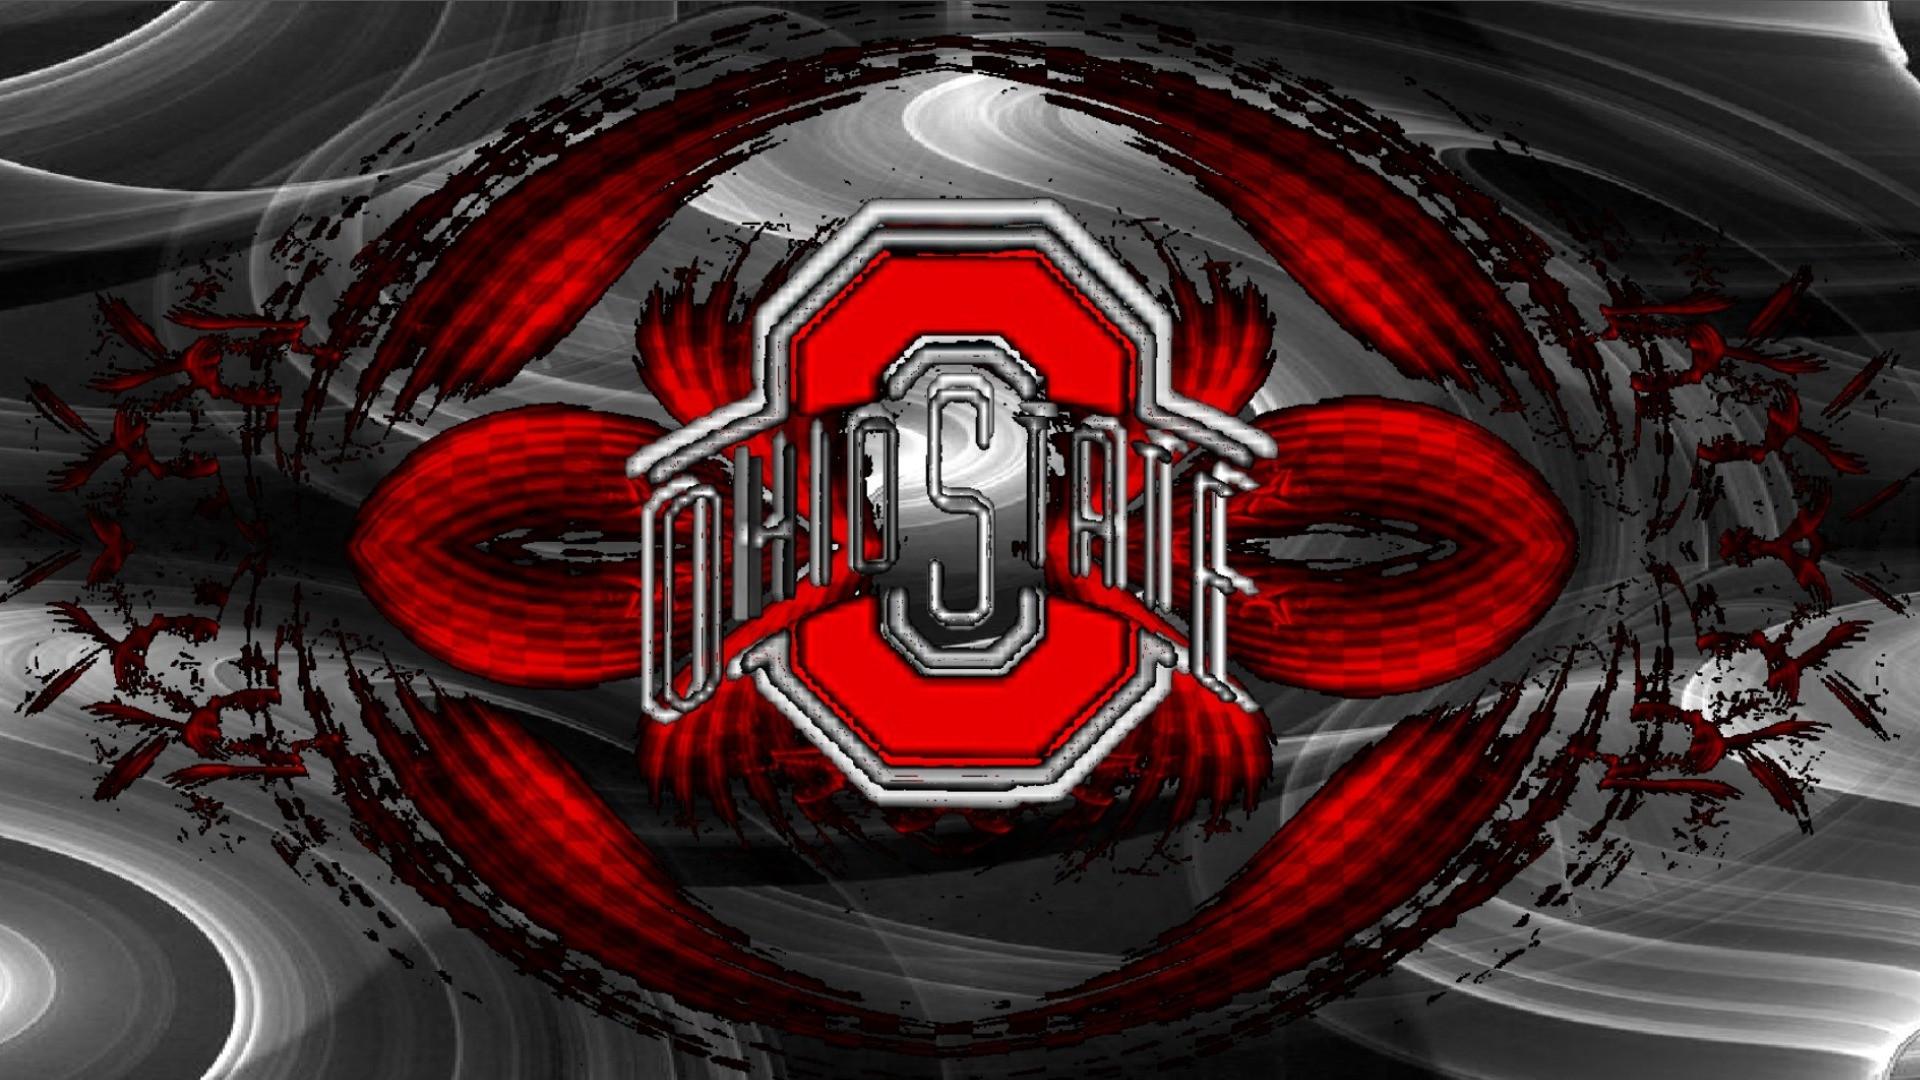 Ohio State Buckeyes Football Wallpapers | Wallpapers, Backgrounds ...